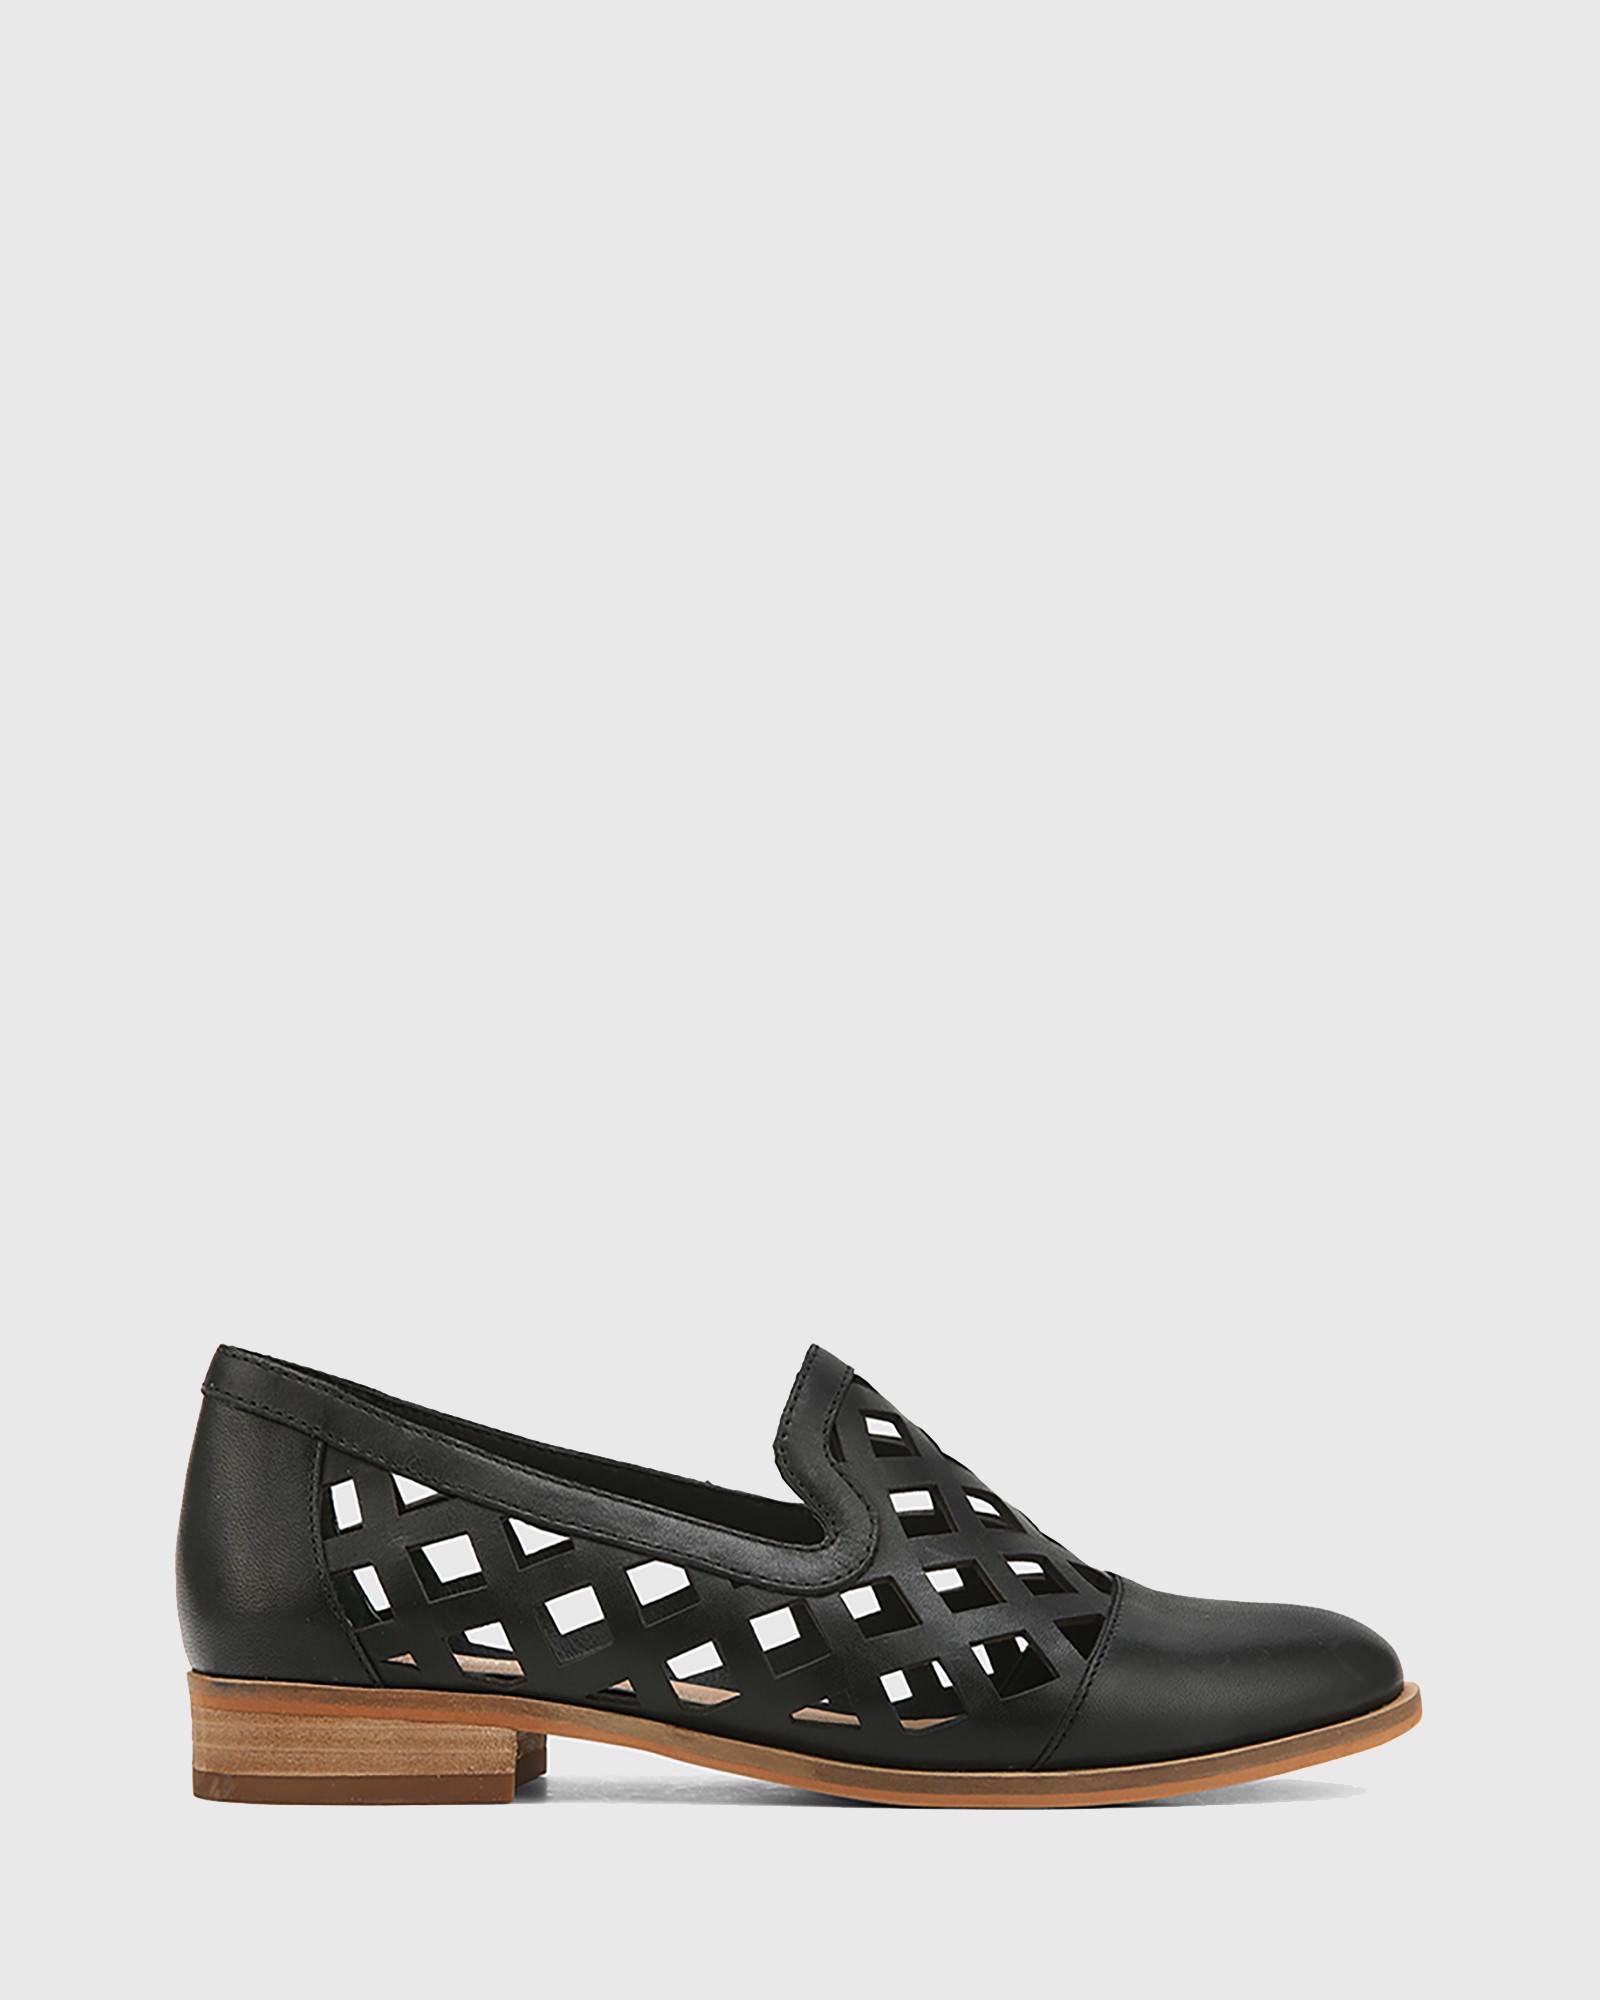 Heeva Nappa Leather Almond Toe Flats Black by Wittner | ShoeSales